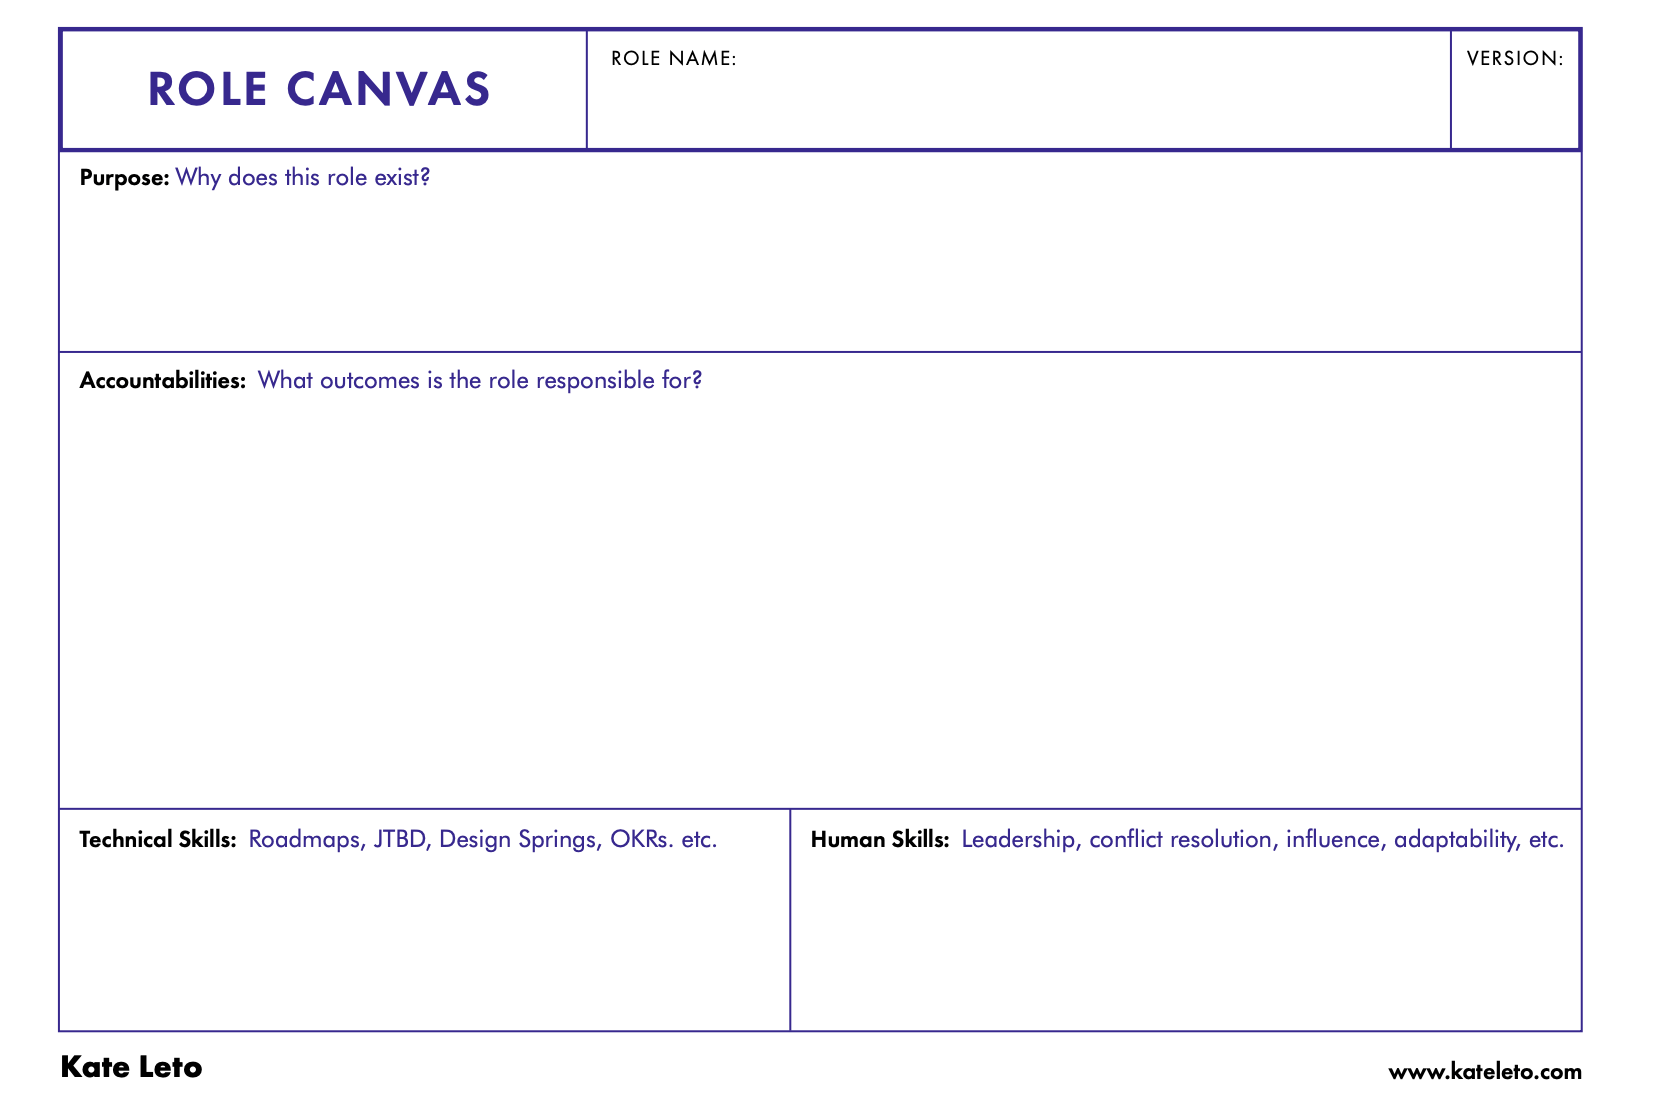 Role canvas